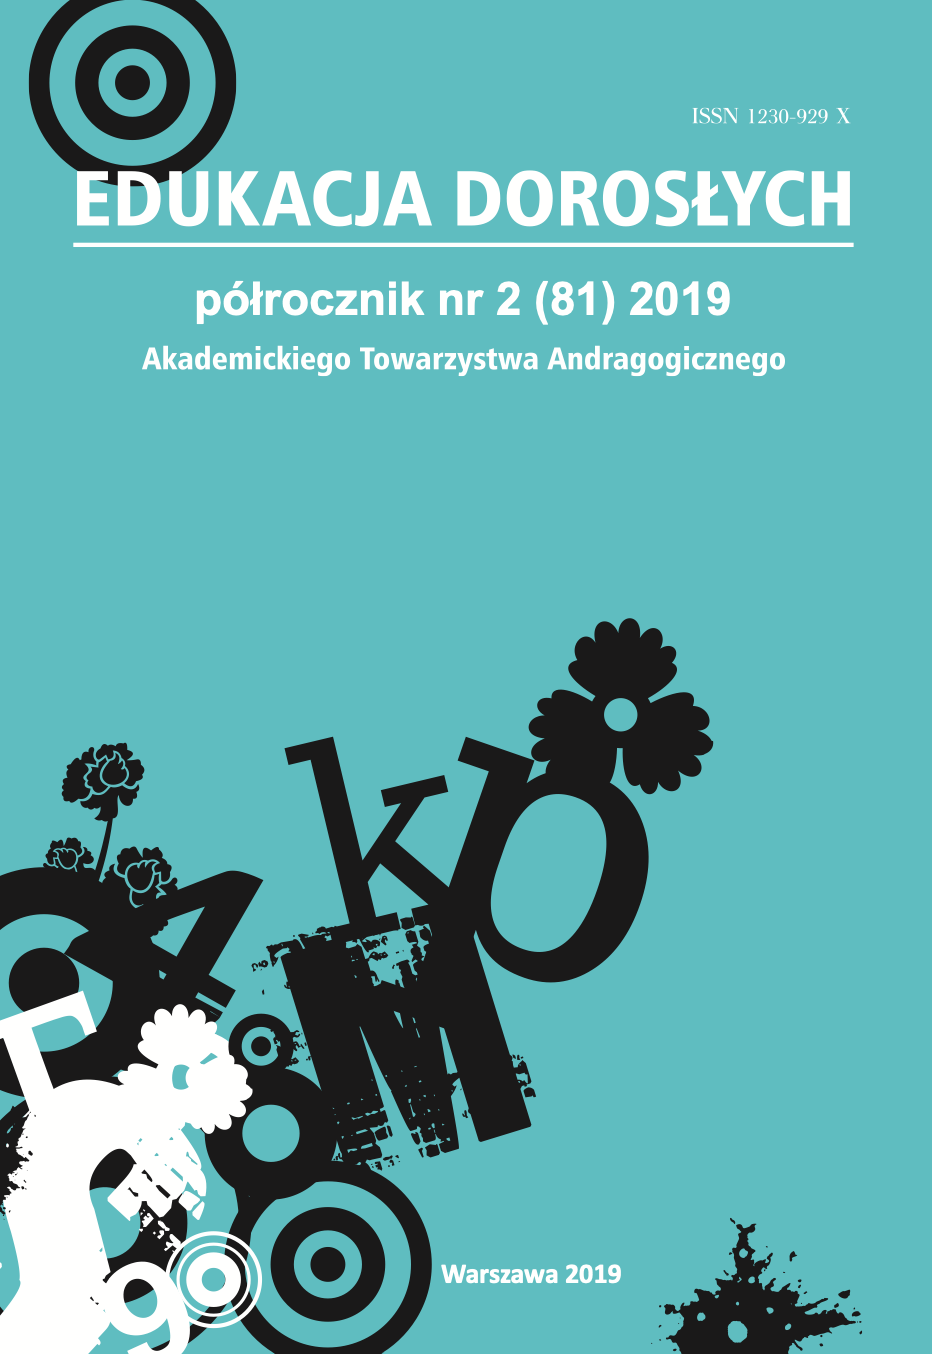 The role of the Institute of Adult Education in the developmentof adult education in Poland in the context of the andragogical pastmemory discourse Cover Image